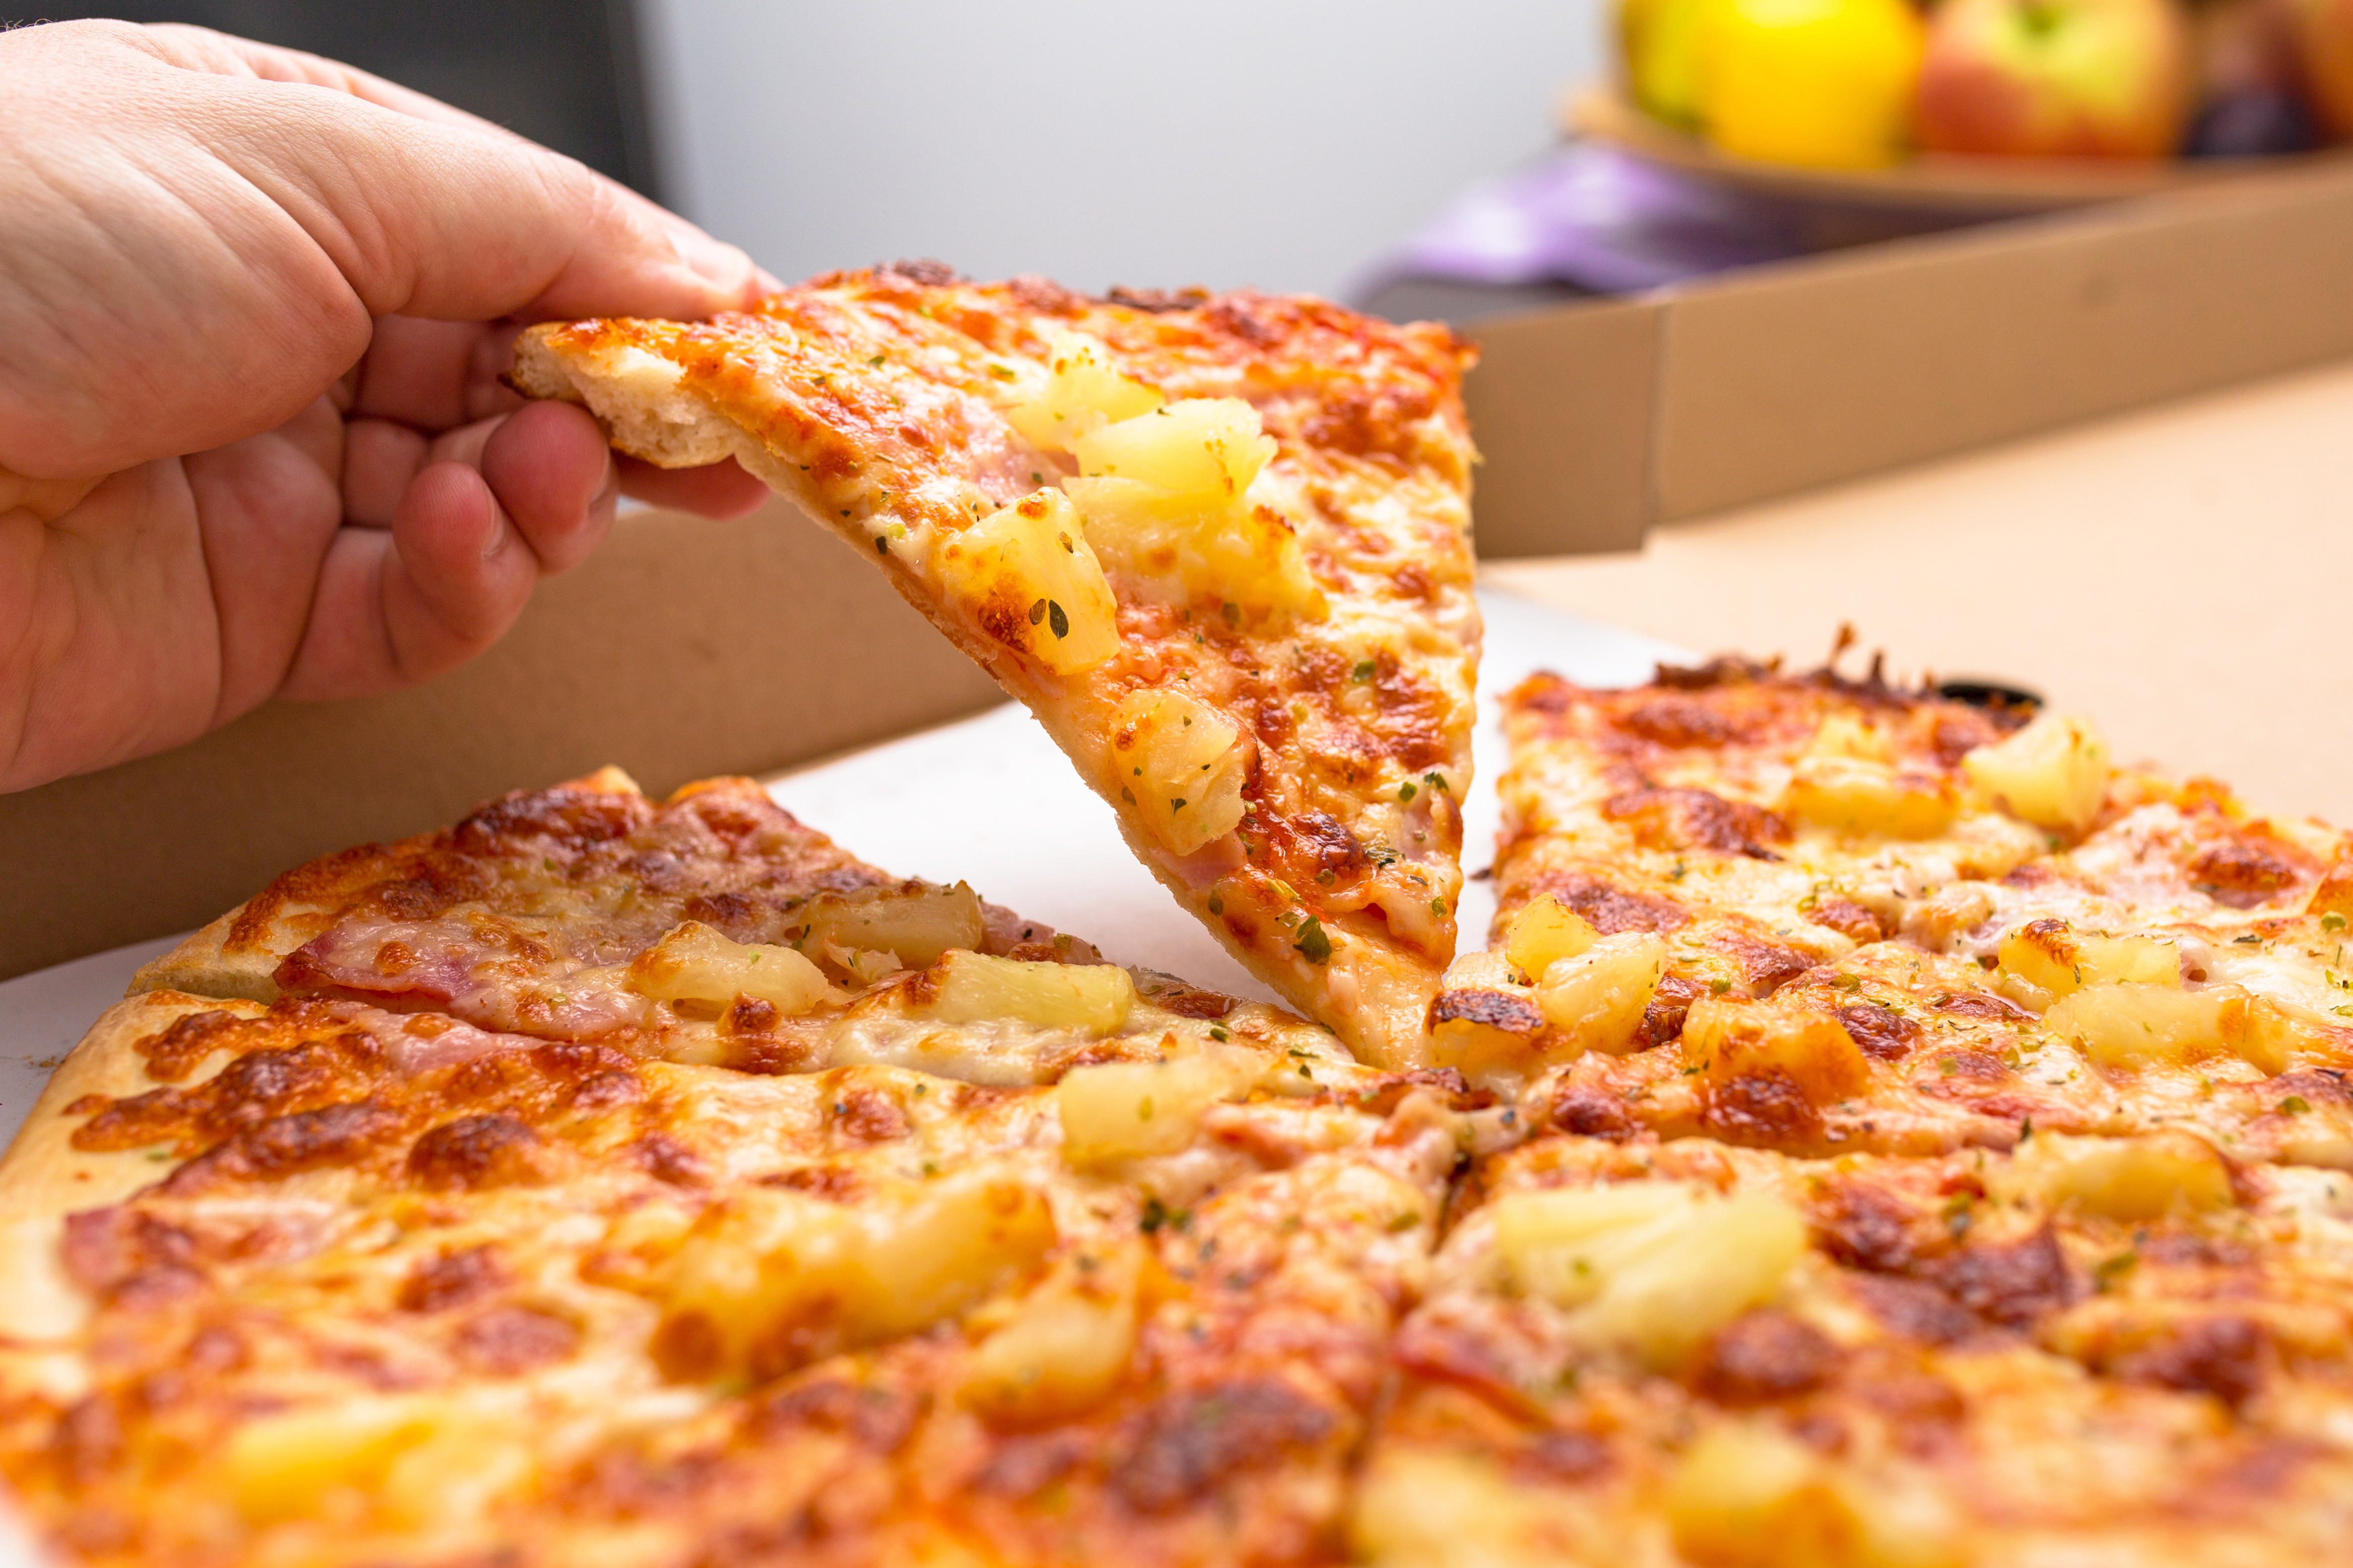 pics Pineapple On Pizza Yes Or No Questions we re asking the important ques...